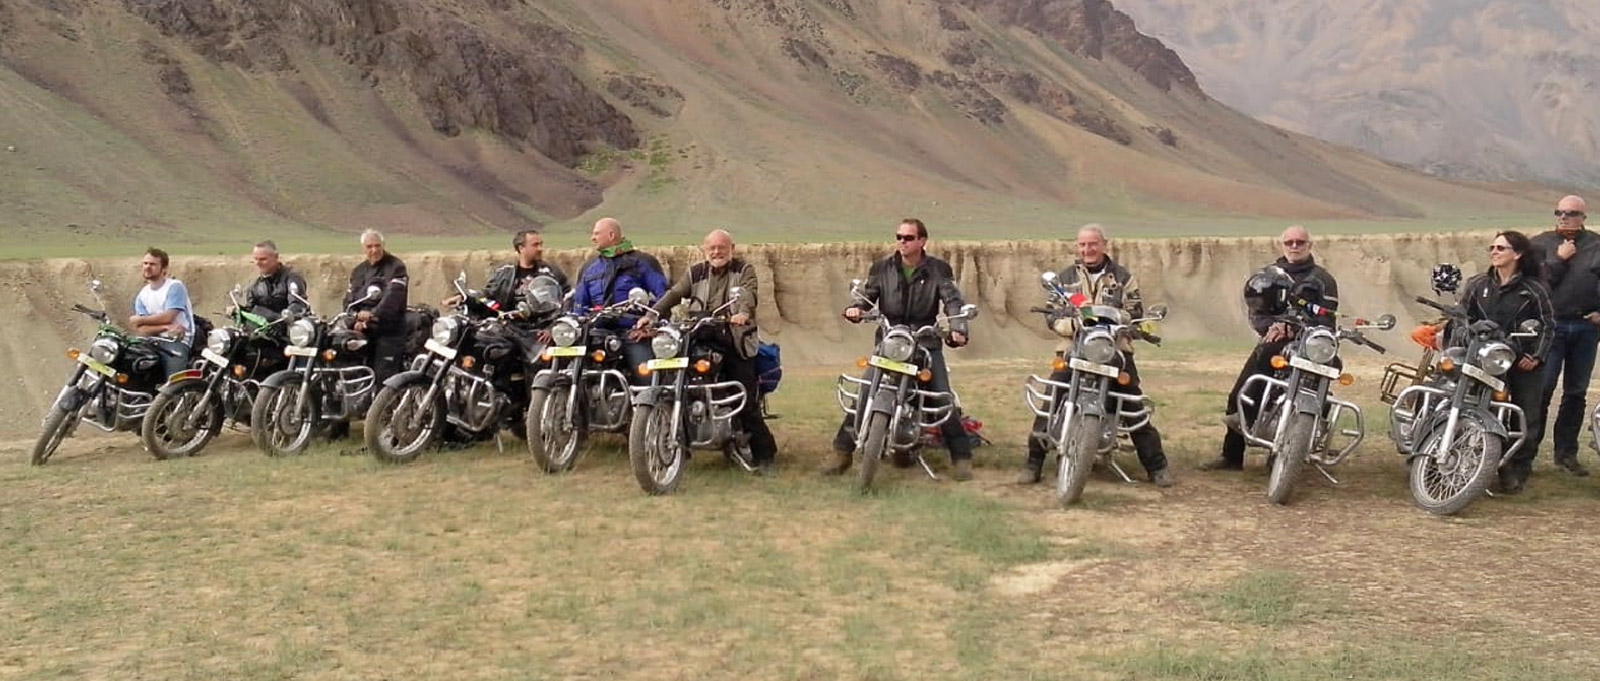 5 Adventurous LocationsFor Motorcycle Tours In India